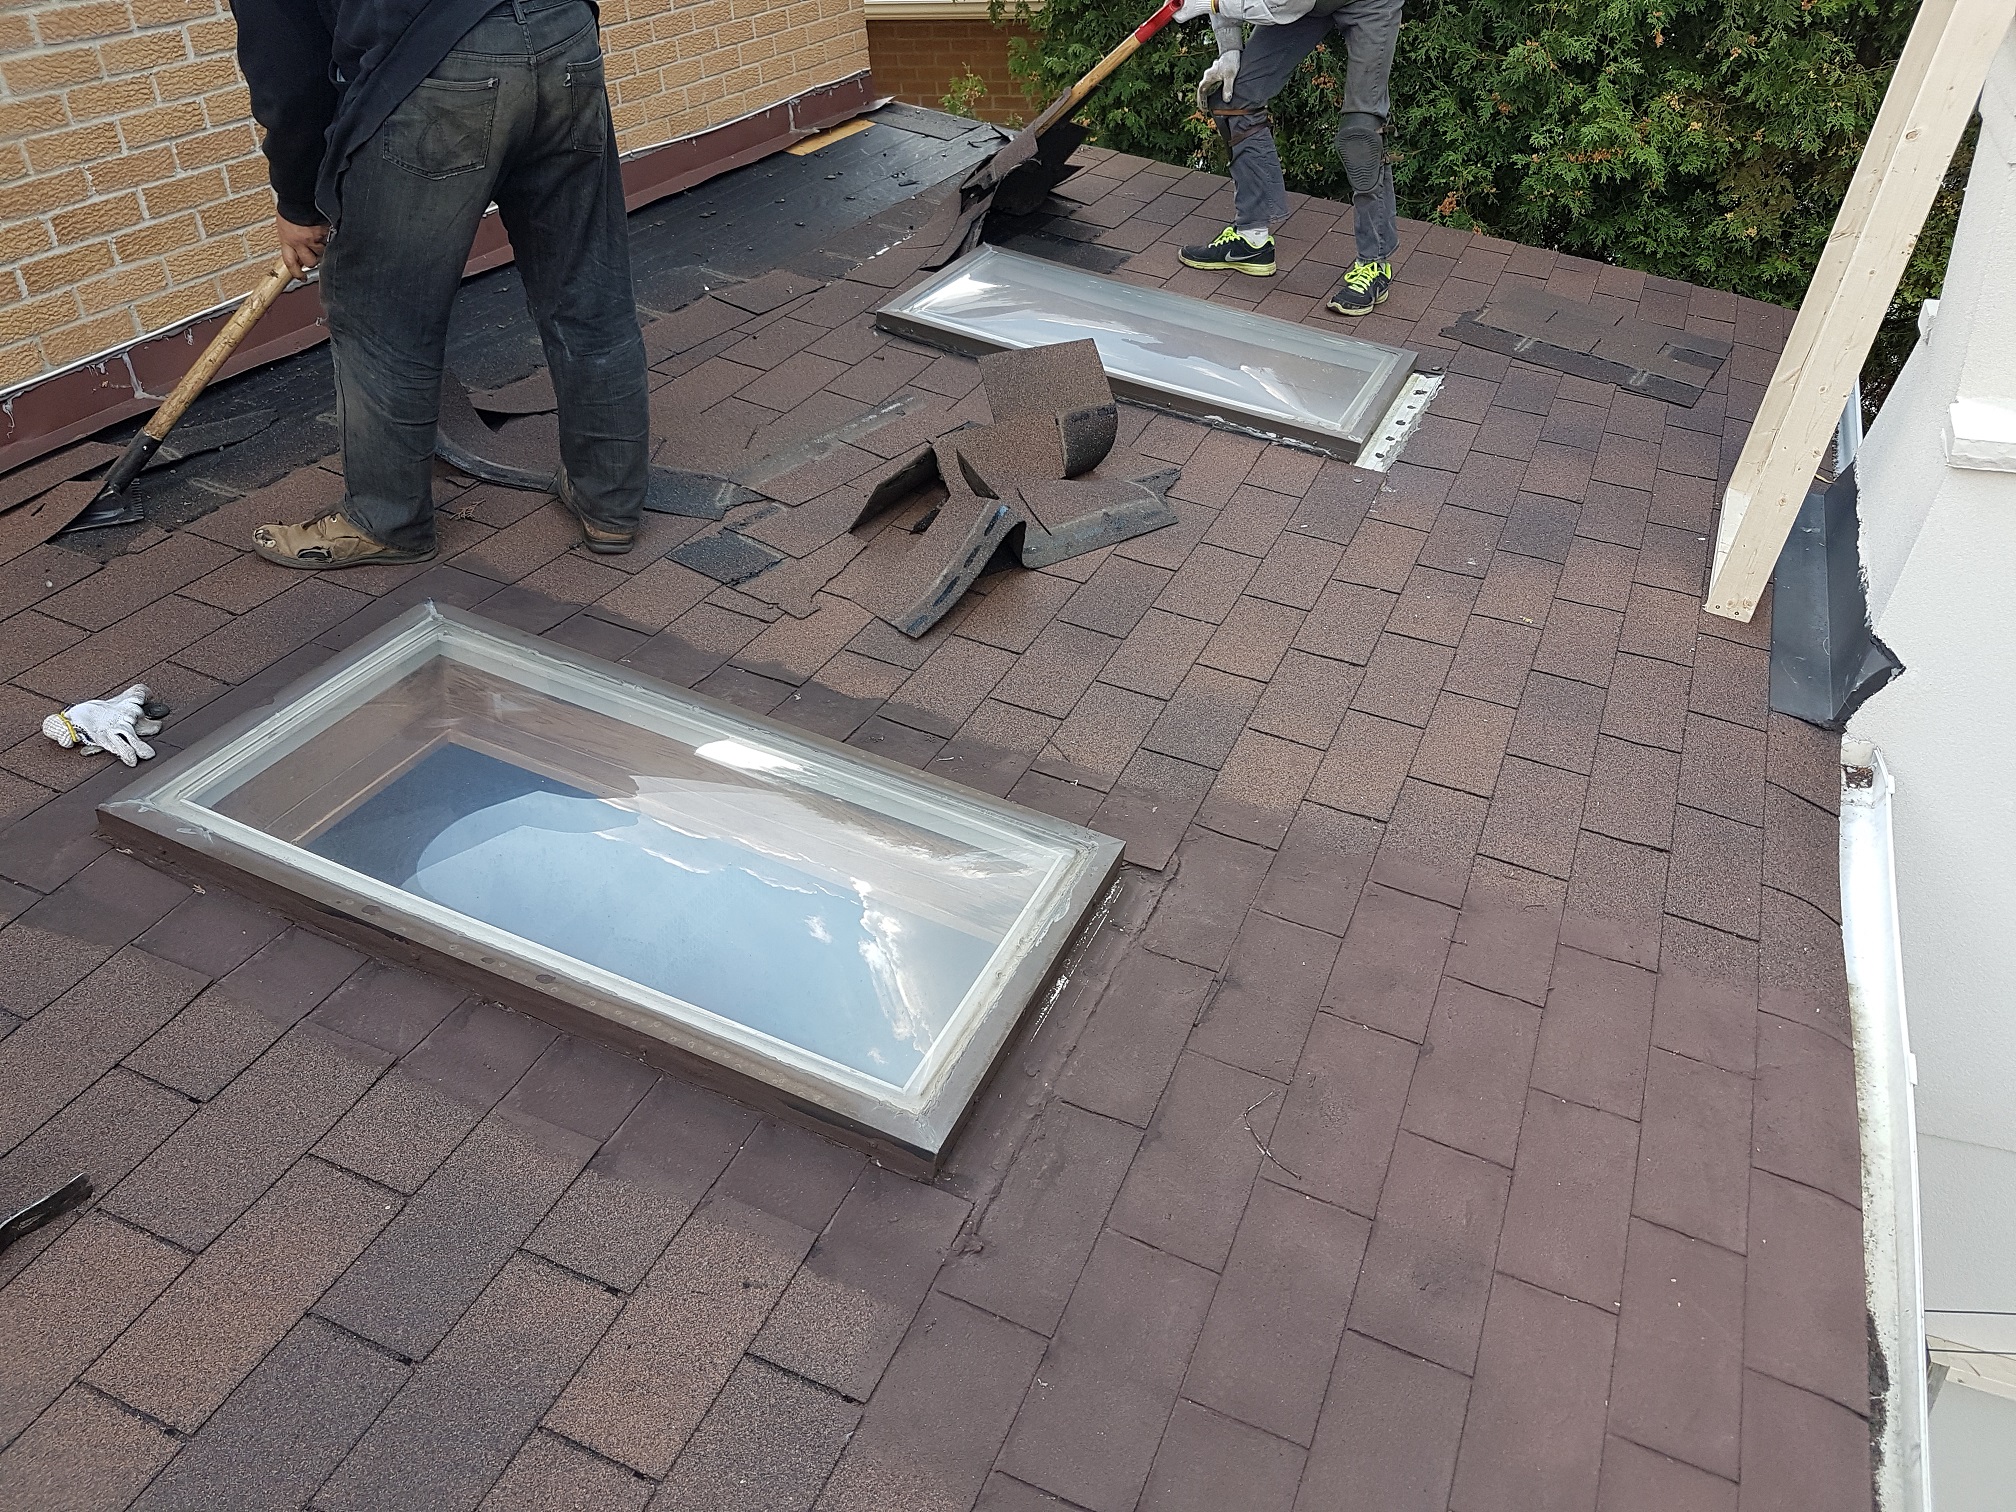 Skylights - Ace Roofing Services Inc. - Toronto (GTA) Roofing Company